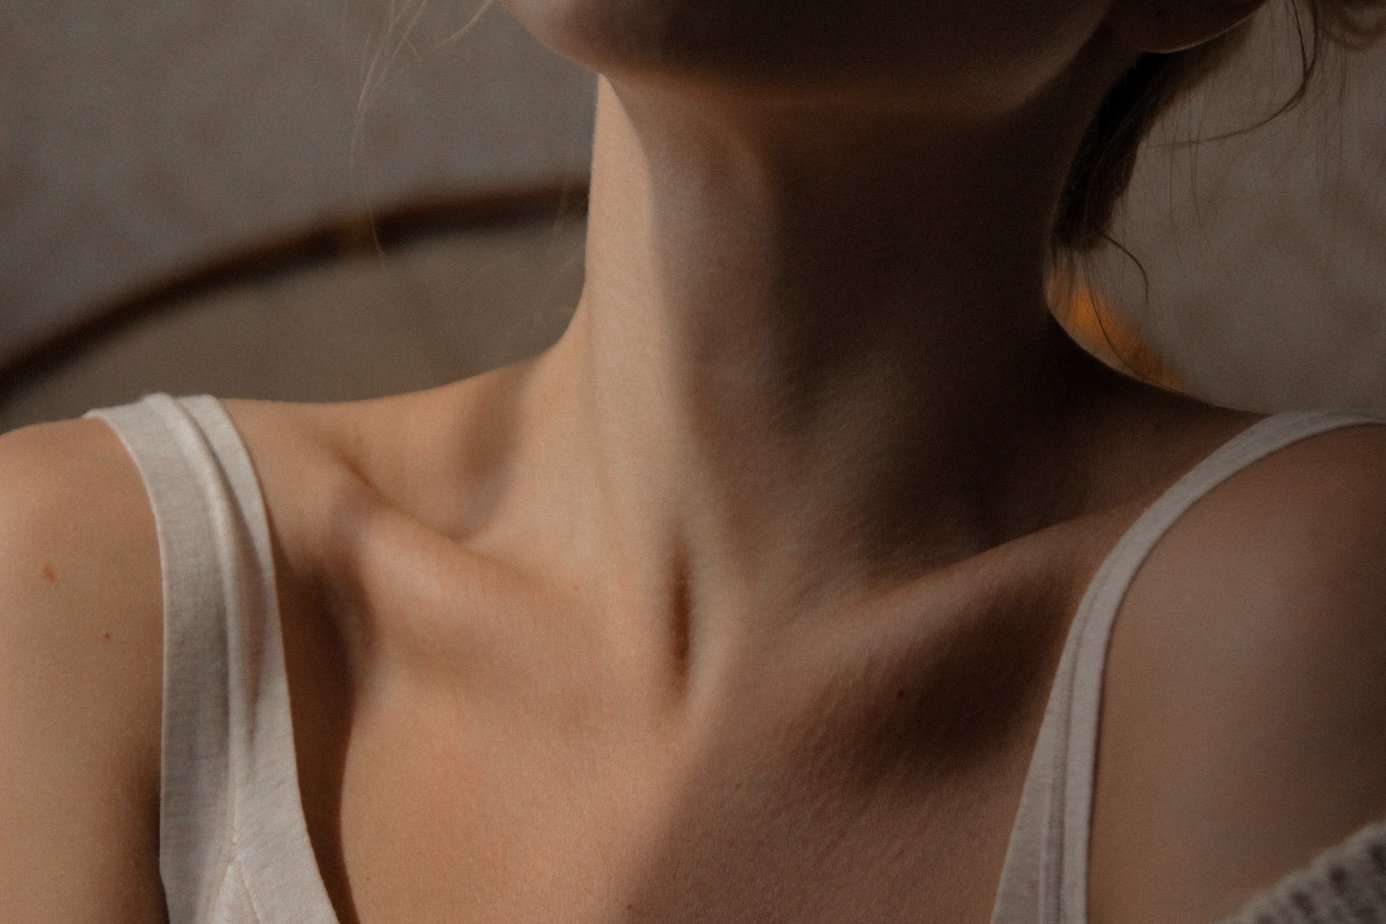 How to take care of your neck and cleavage? Effective skin care treatments